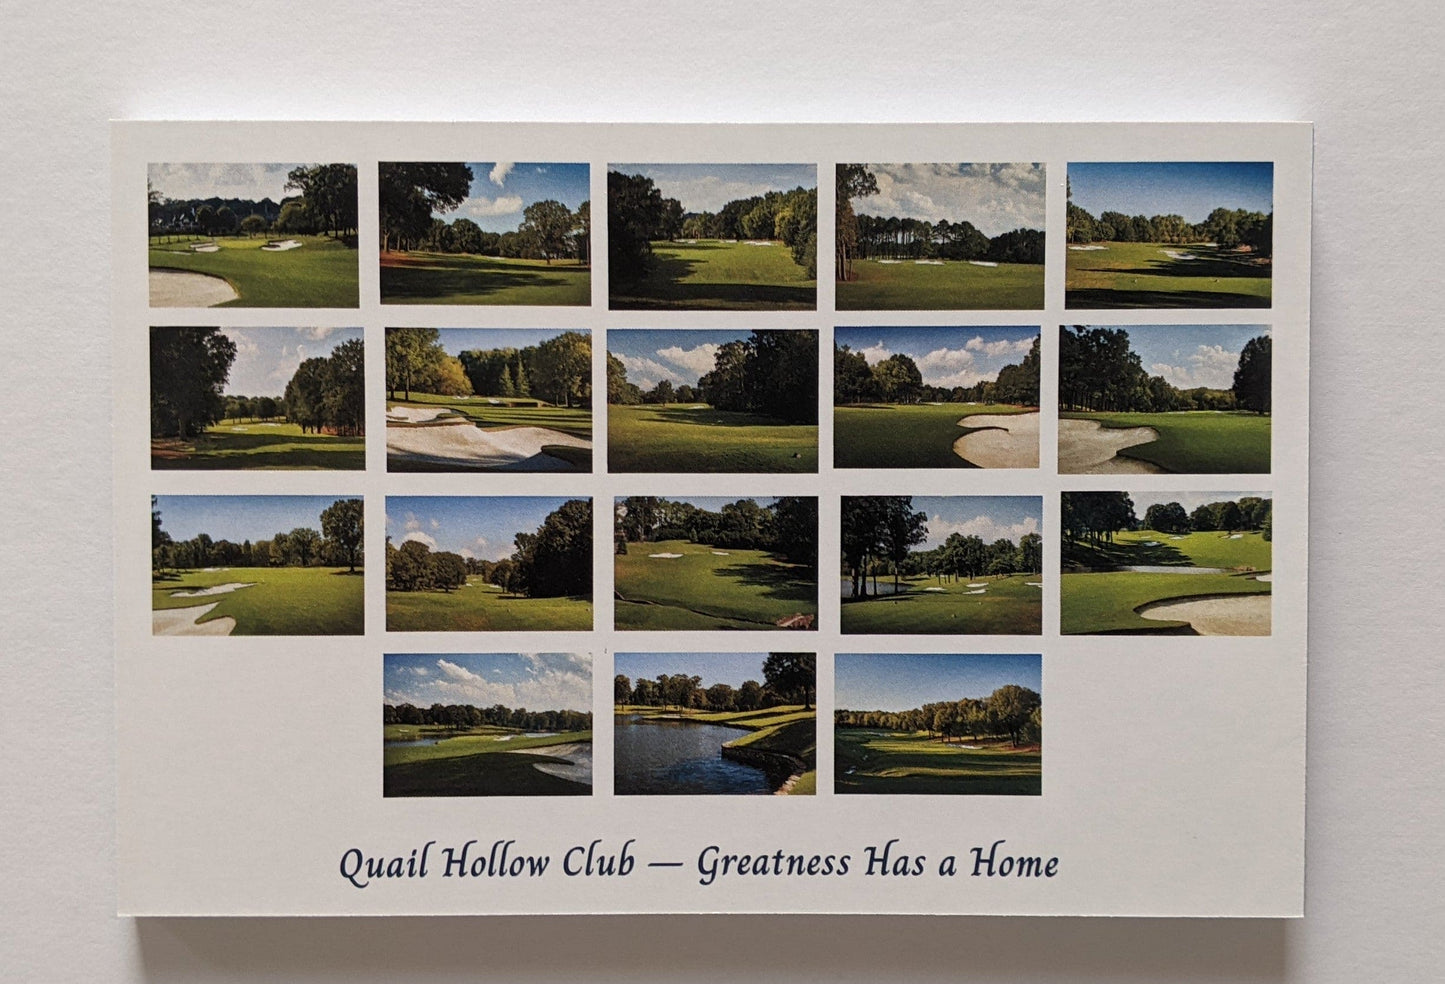 Quail Hollow - "Greatness Has a Home"